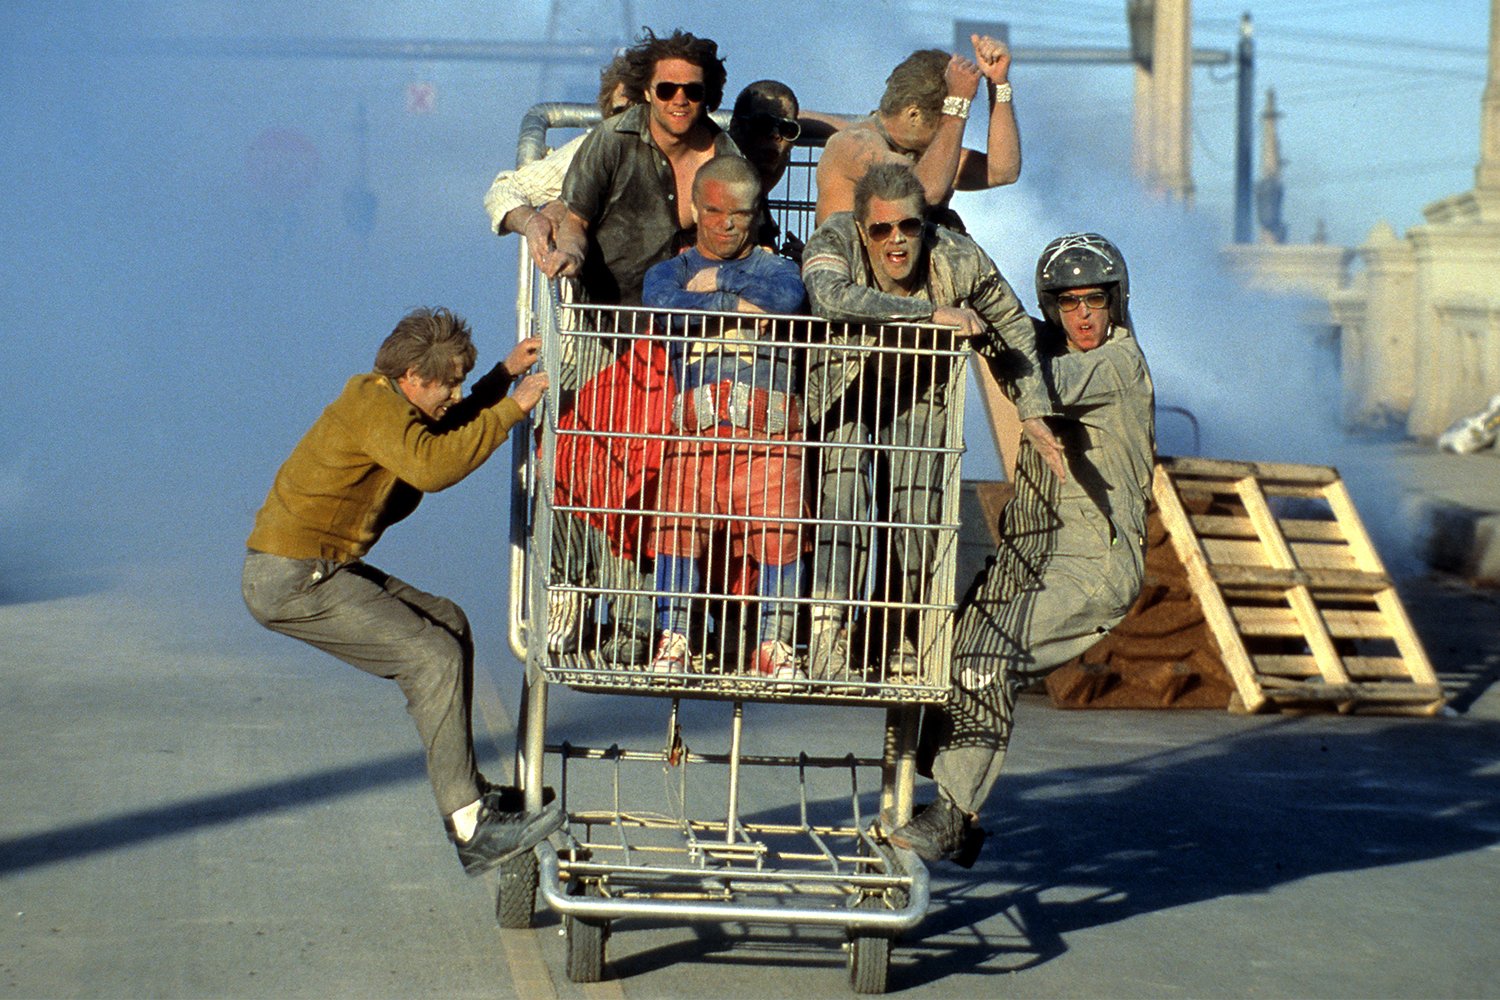 A still from "Jackass: The Movie" (2002)